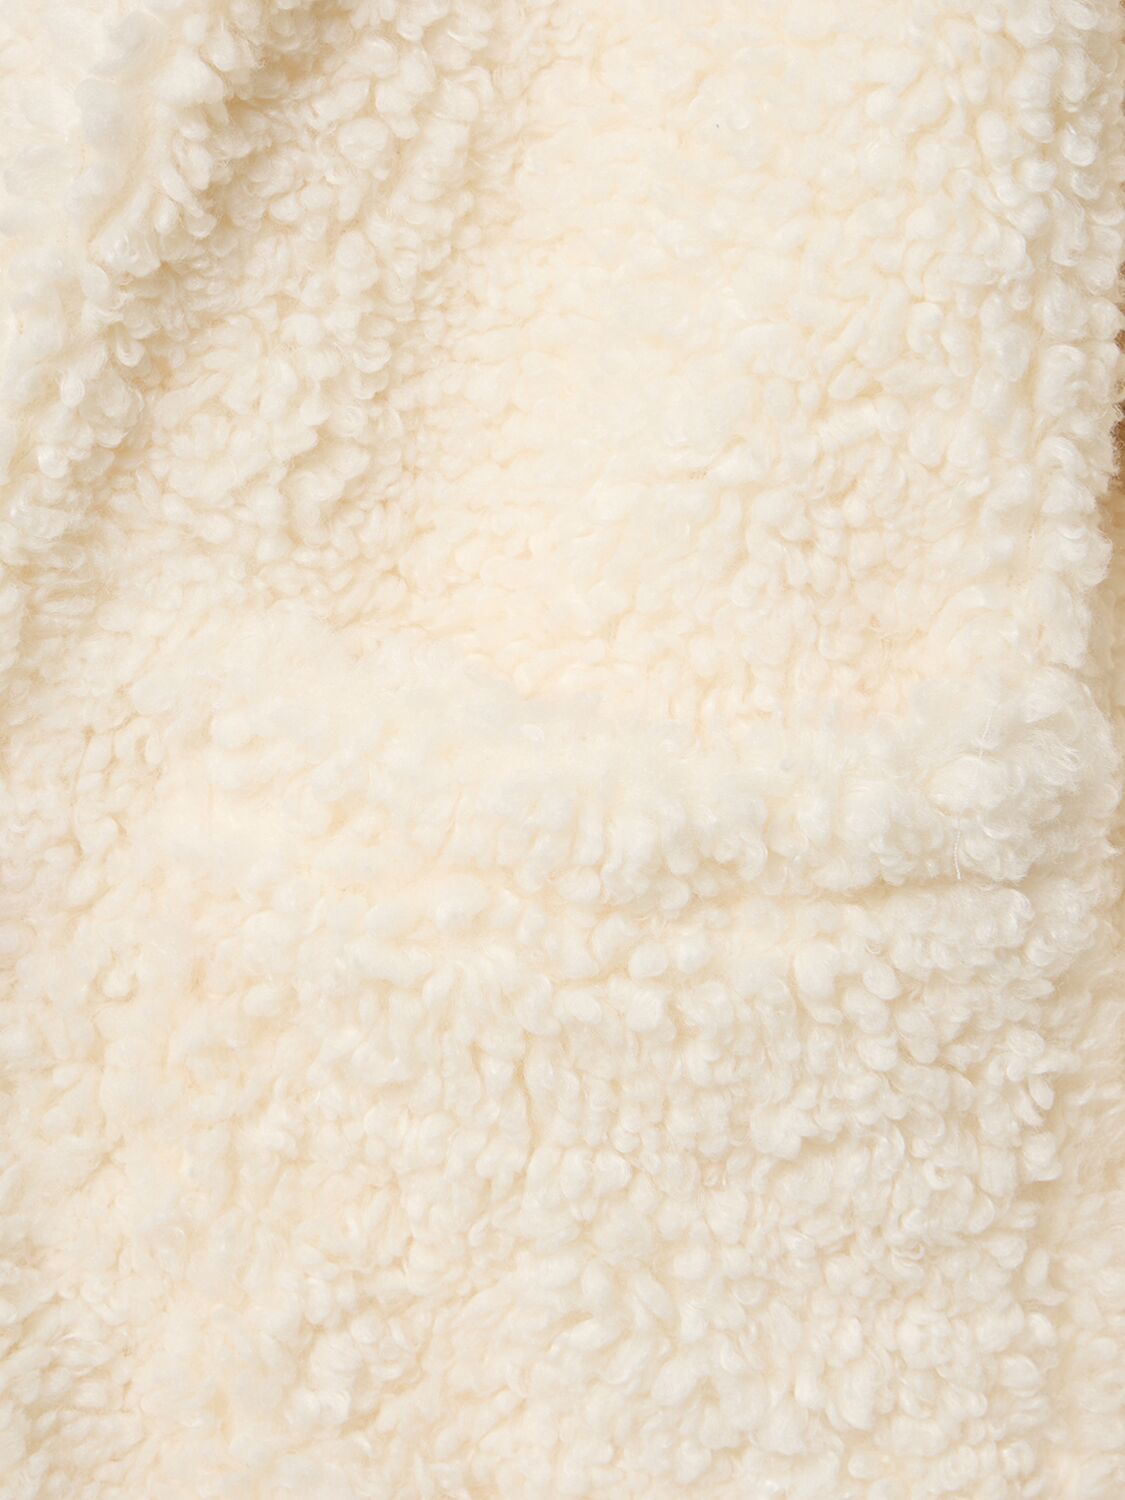 Shop Weworewhat Curly Faux Sherpa Coat In Beige